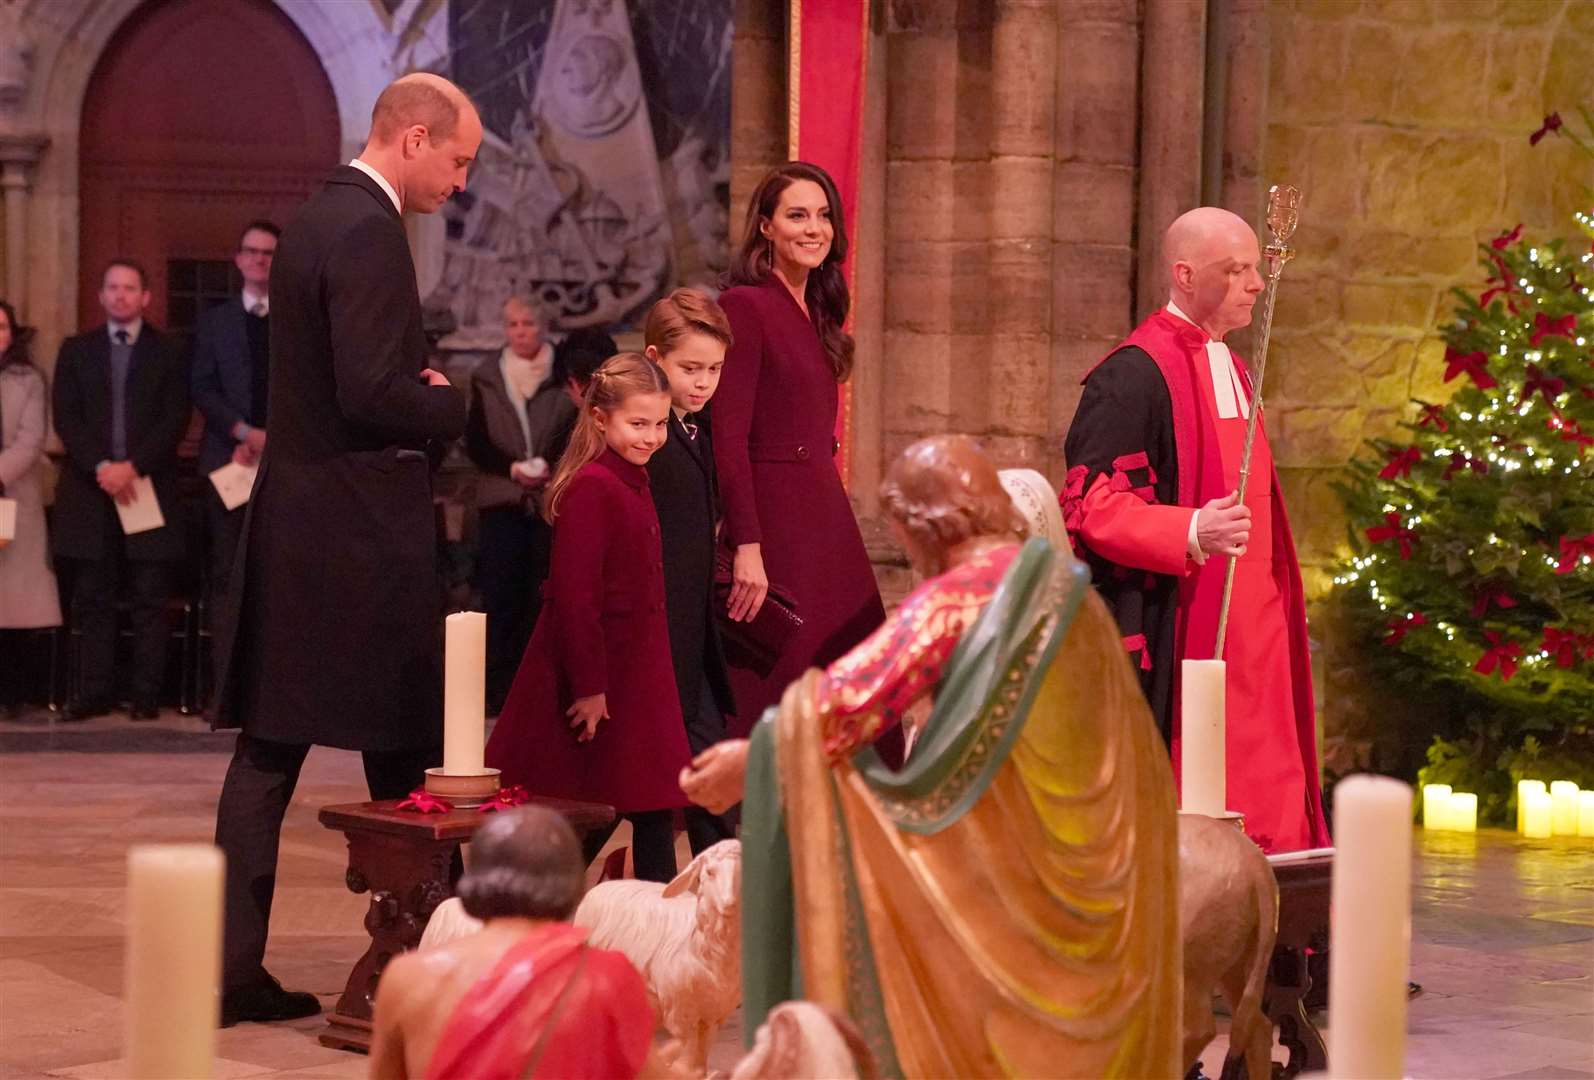 The Prince and Princess of Wales arriving with their children Princess Charlotte and Prince George for the carol service at Westminster Abbey (Kirsty O’Connor/PA)